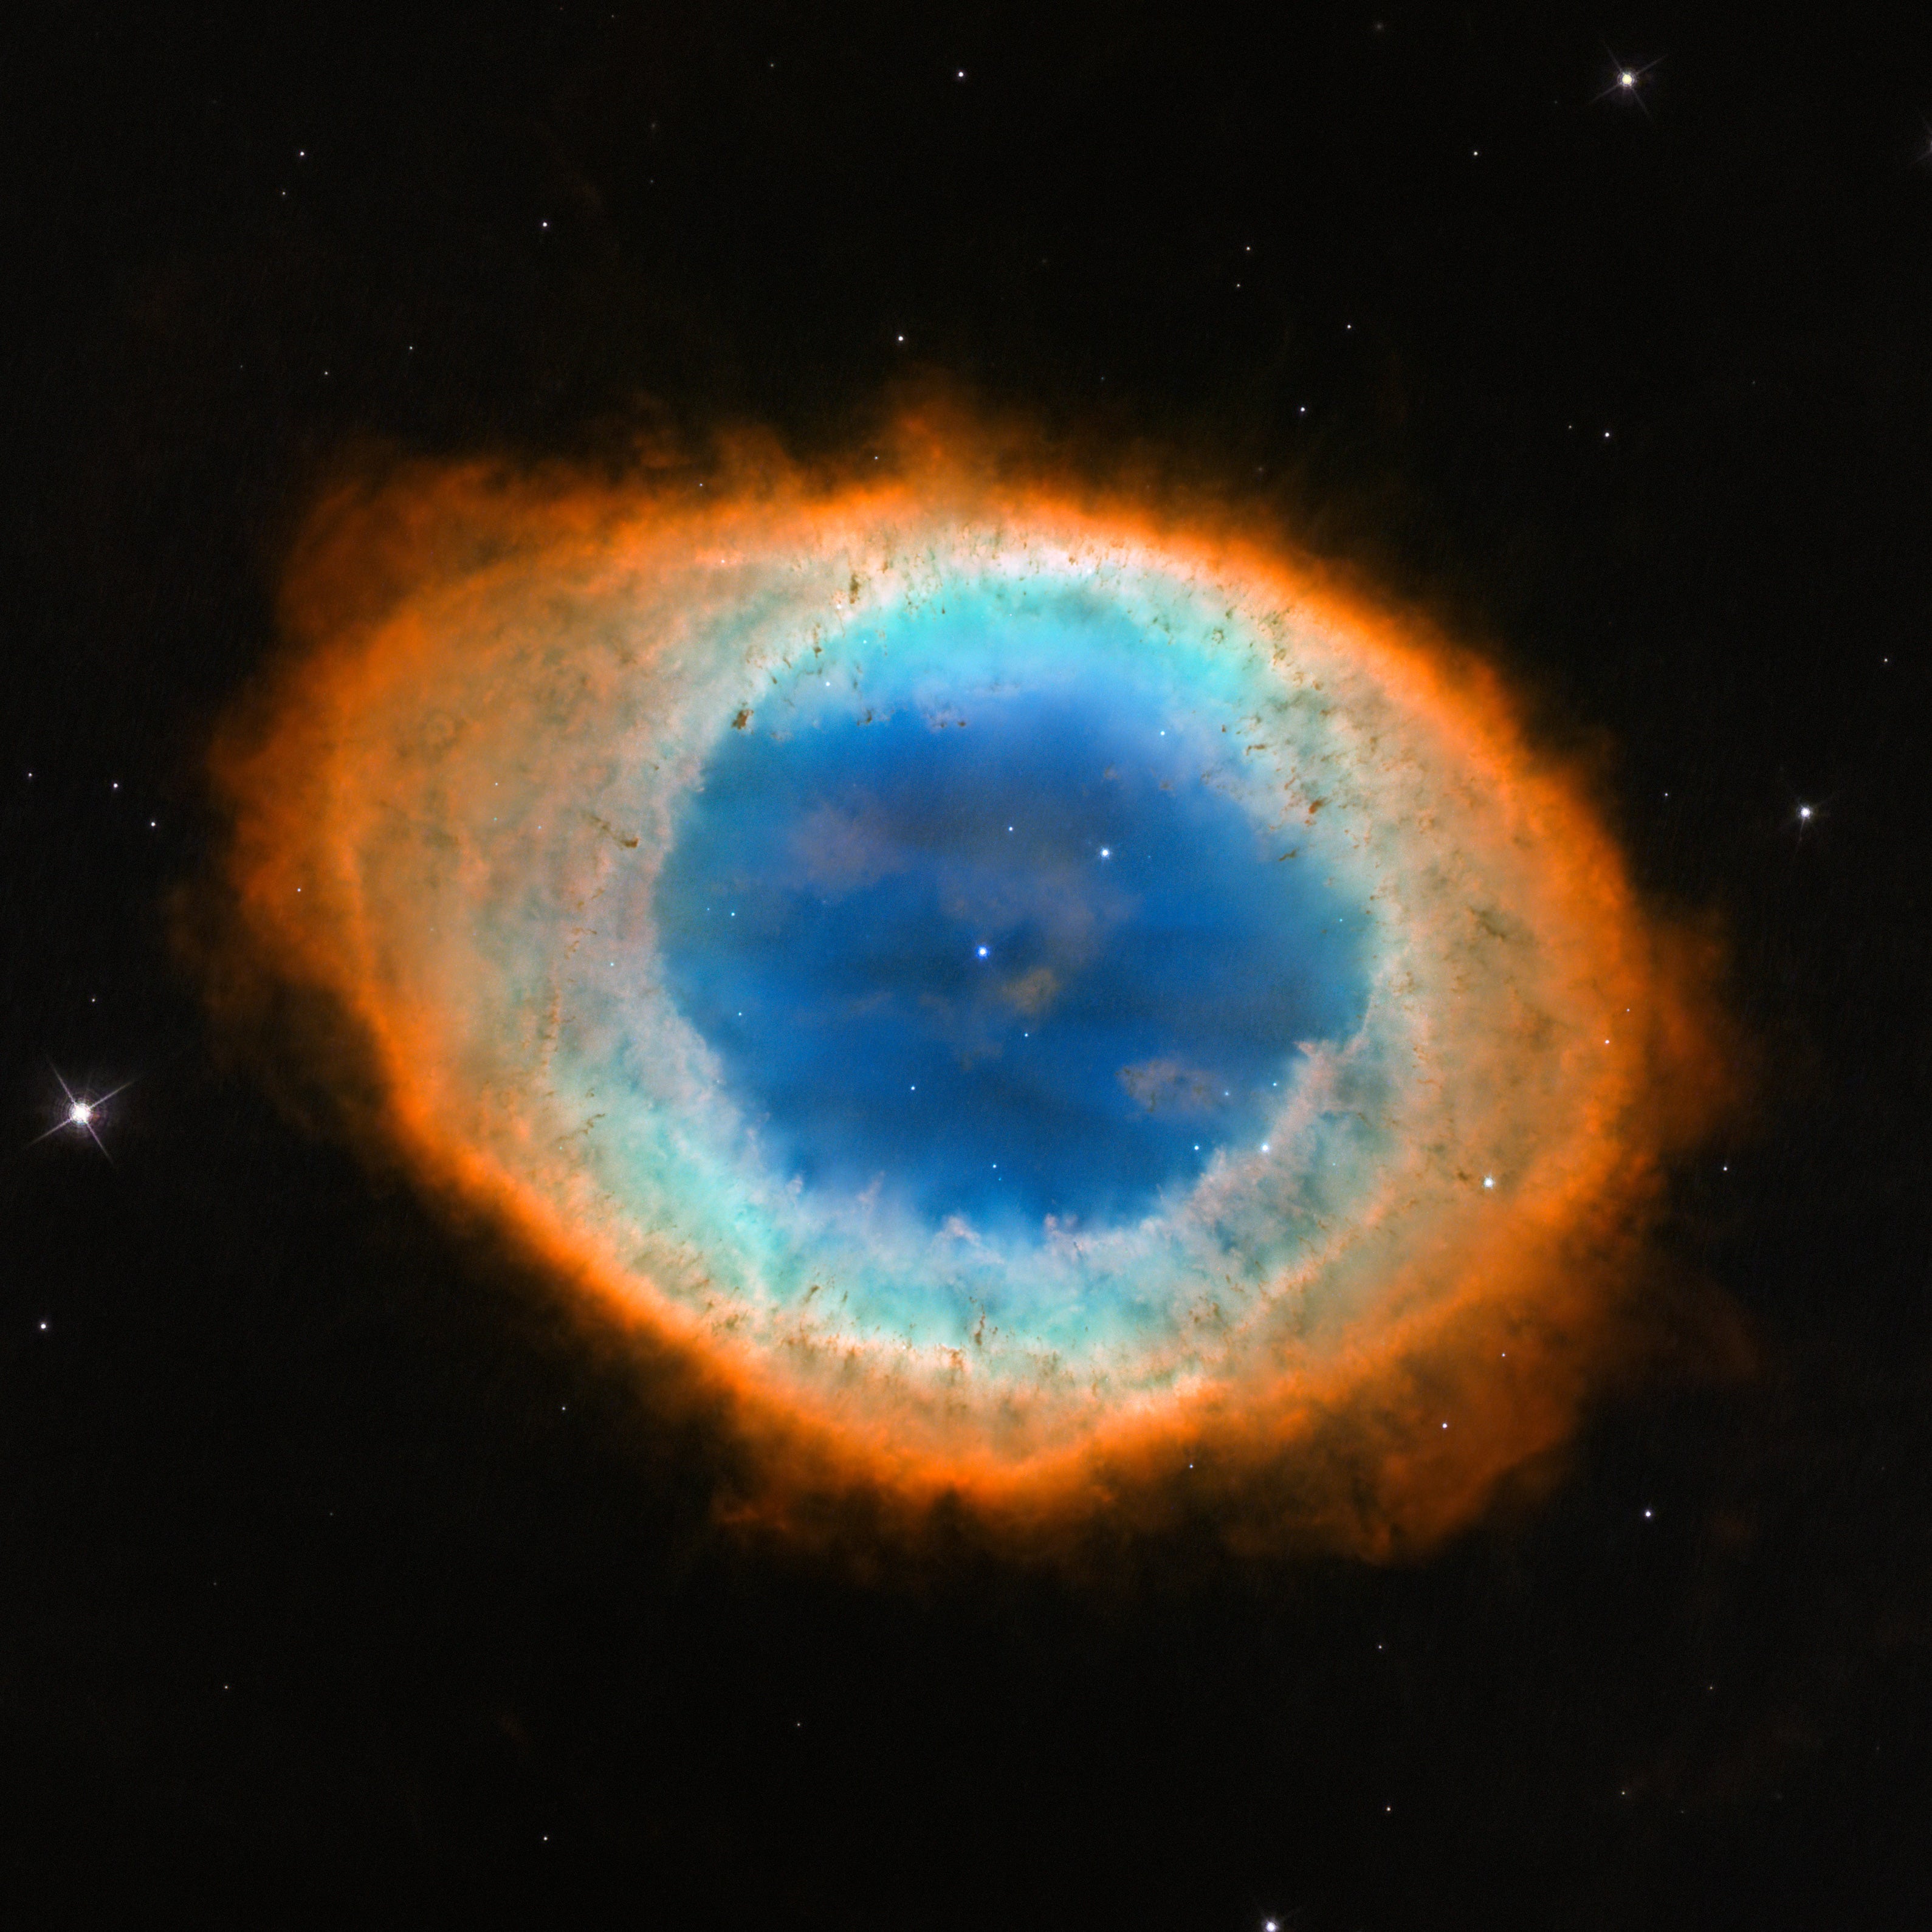 A Hubble Space Telescope image of the Southern Ring nebula